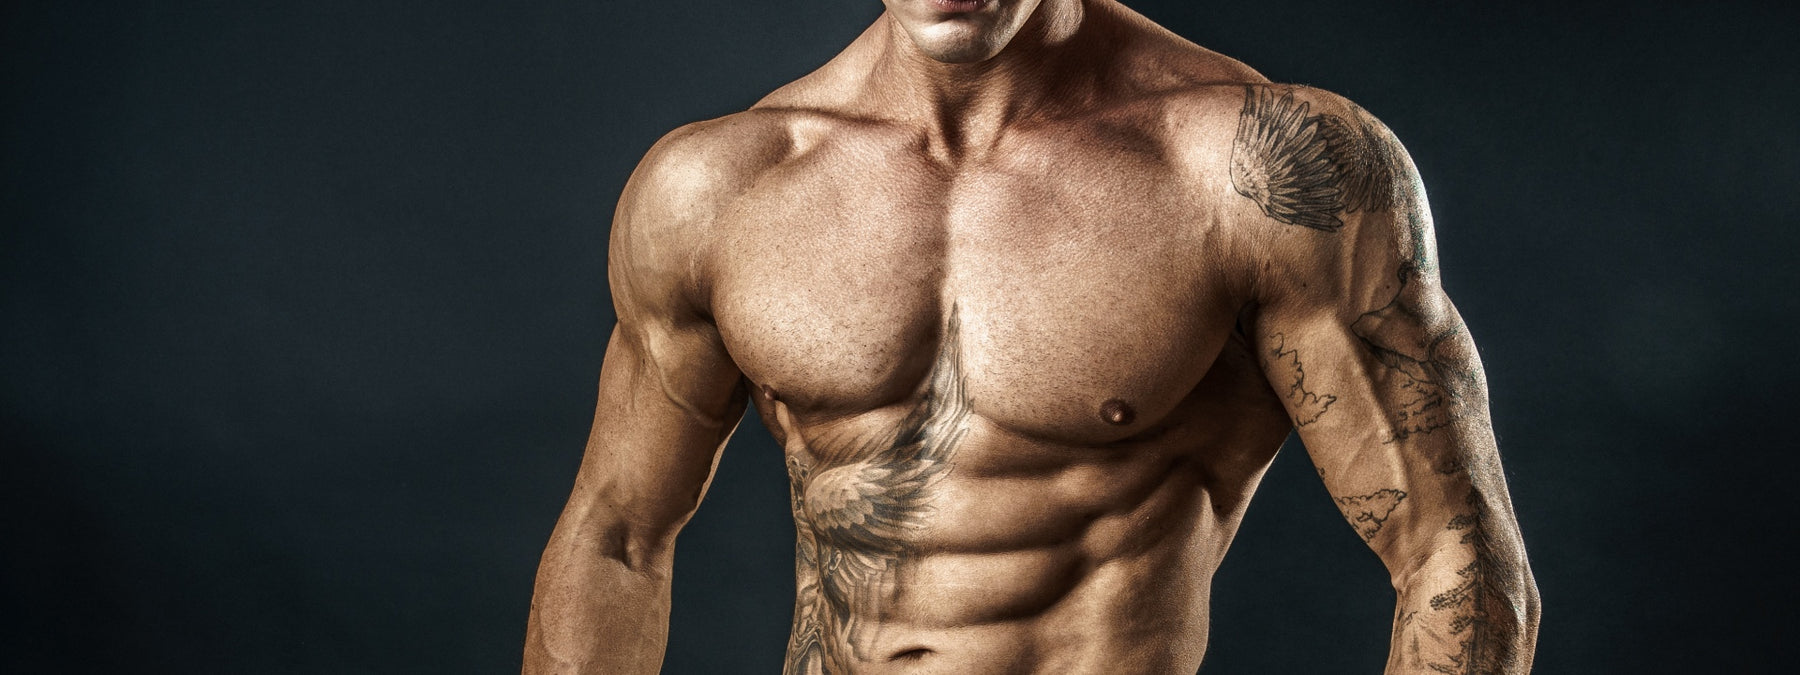 Get Shredded: 5 Methods For Successful Fat Loss